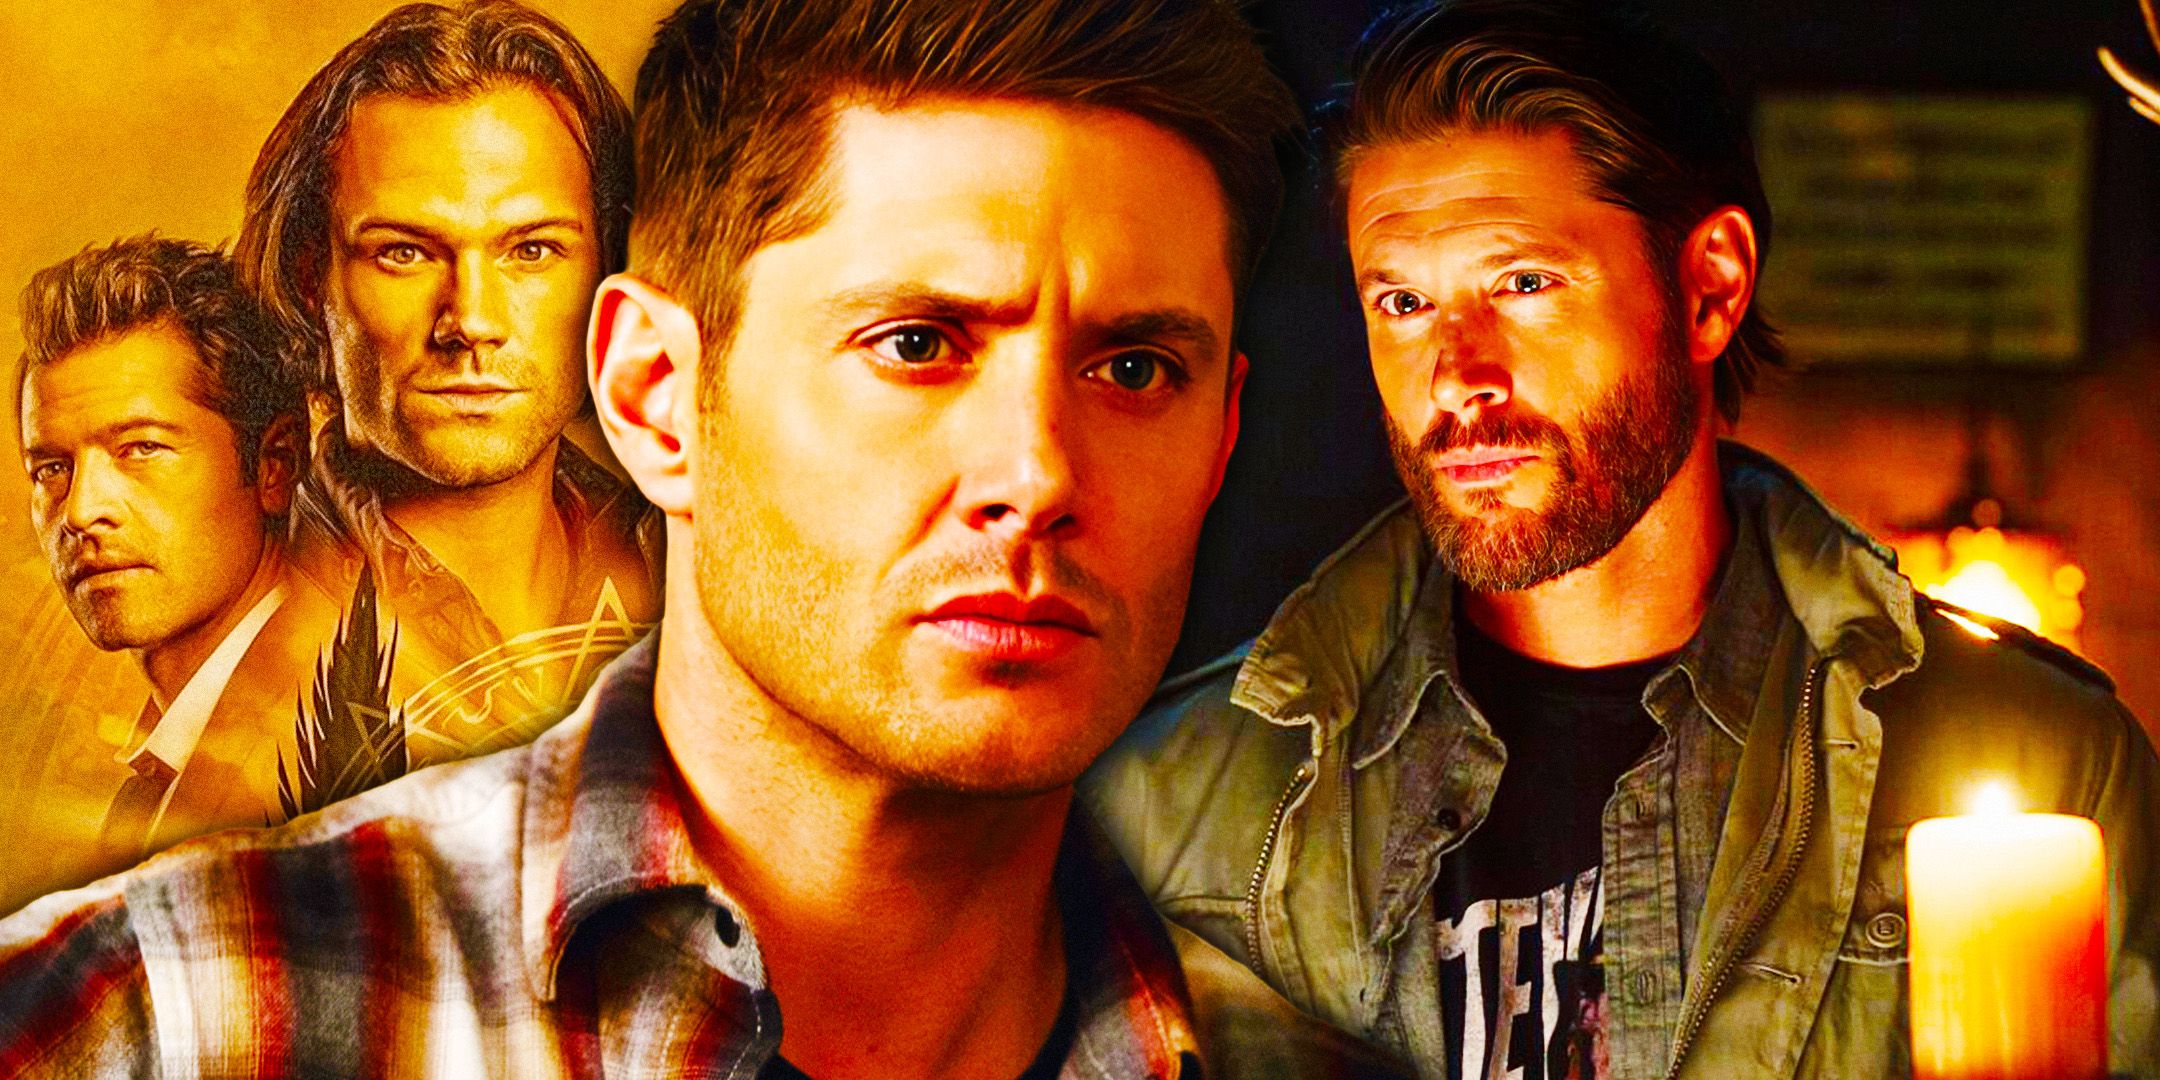 Jensen Ackles' New TV Show Is A Great Supernatural Replacement While Waiting For A Revival